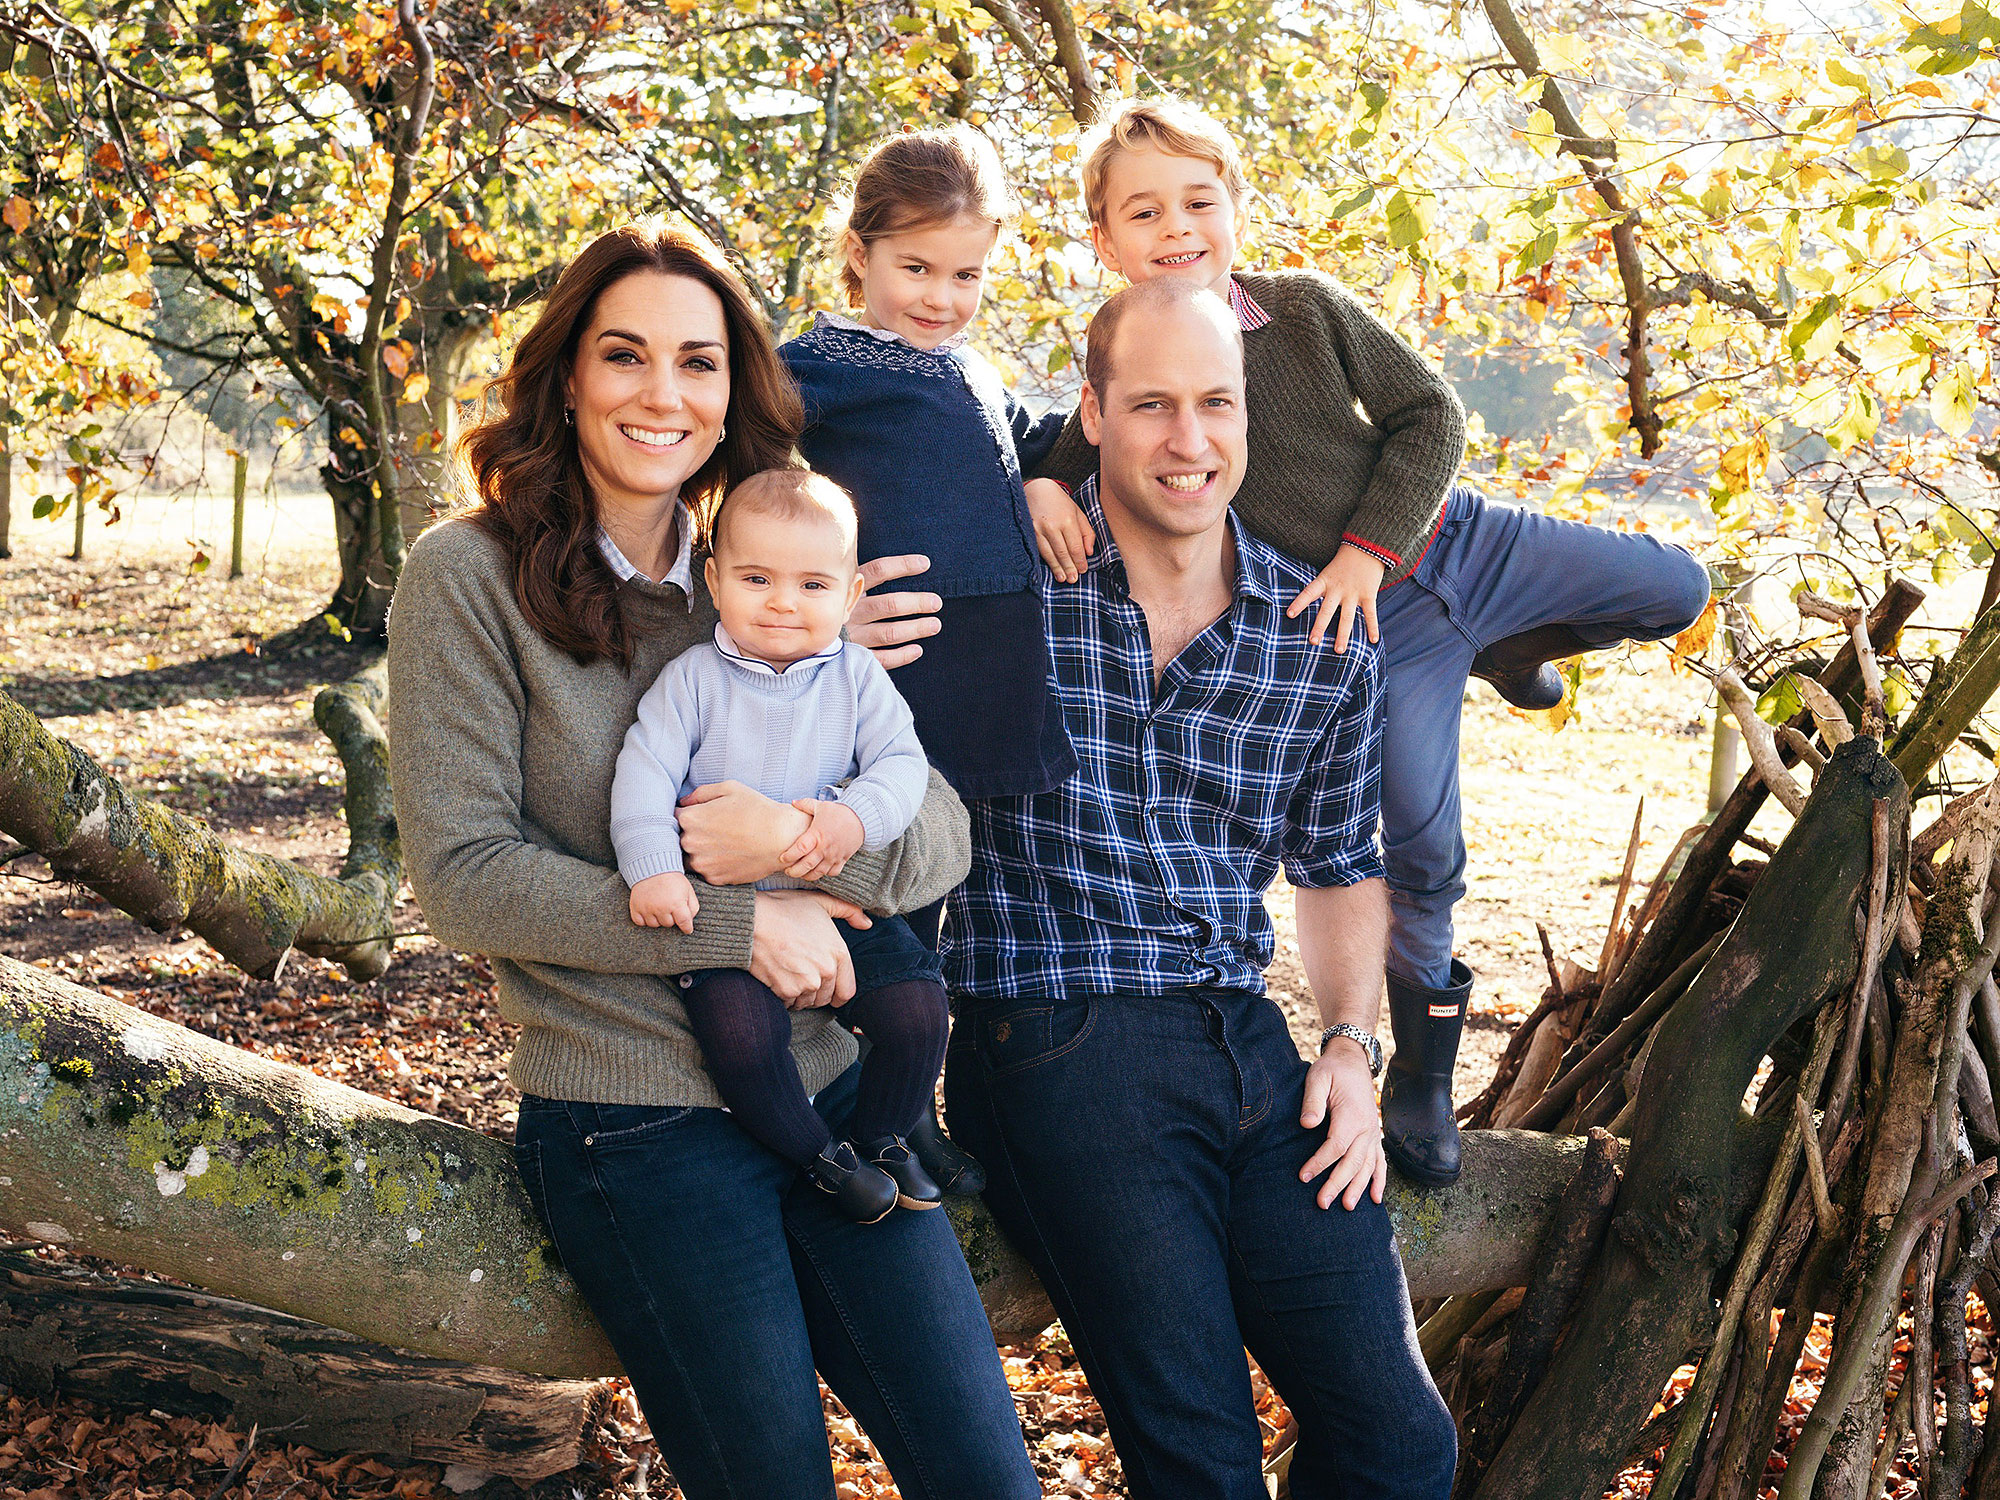 Prince William and Duchess Kate 3 Kids Prince Louis Princess Charlotte Prince George Cant Wait for Christmas